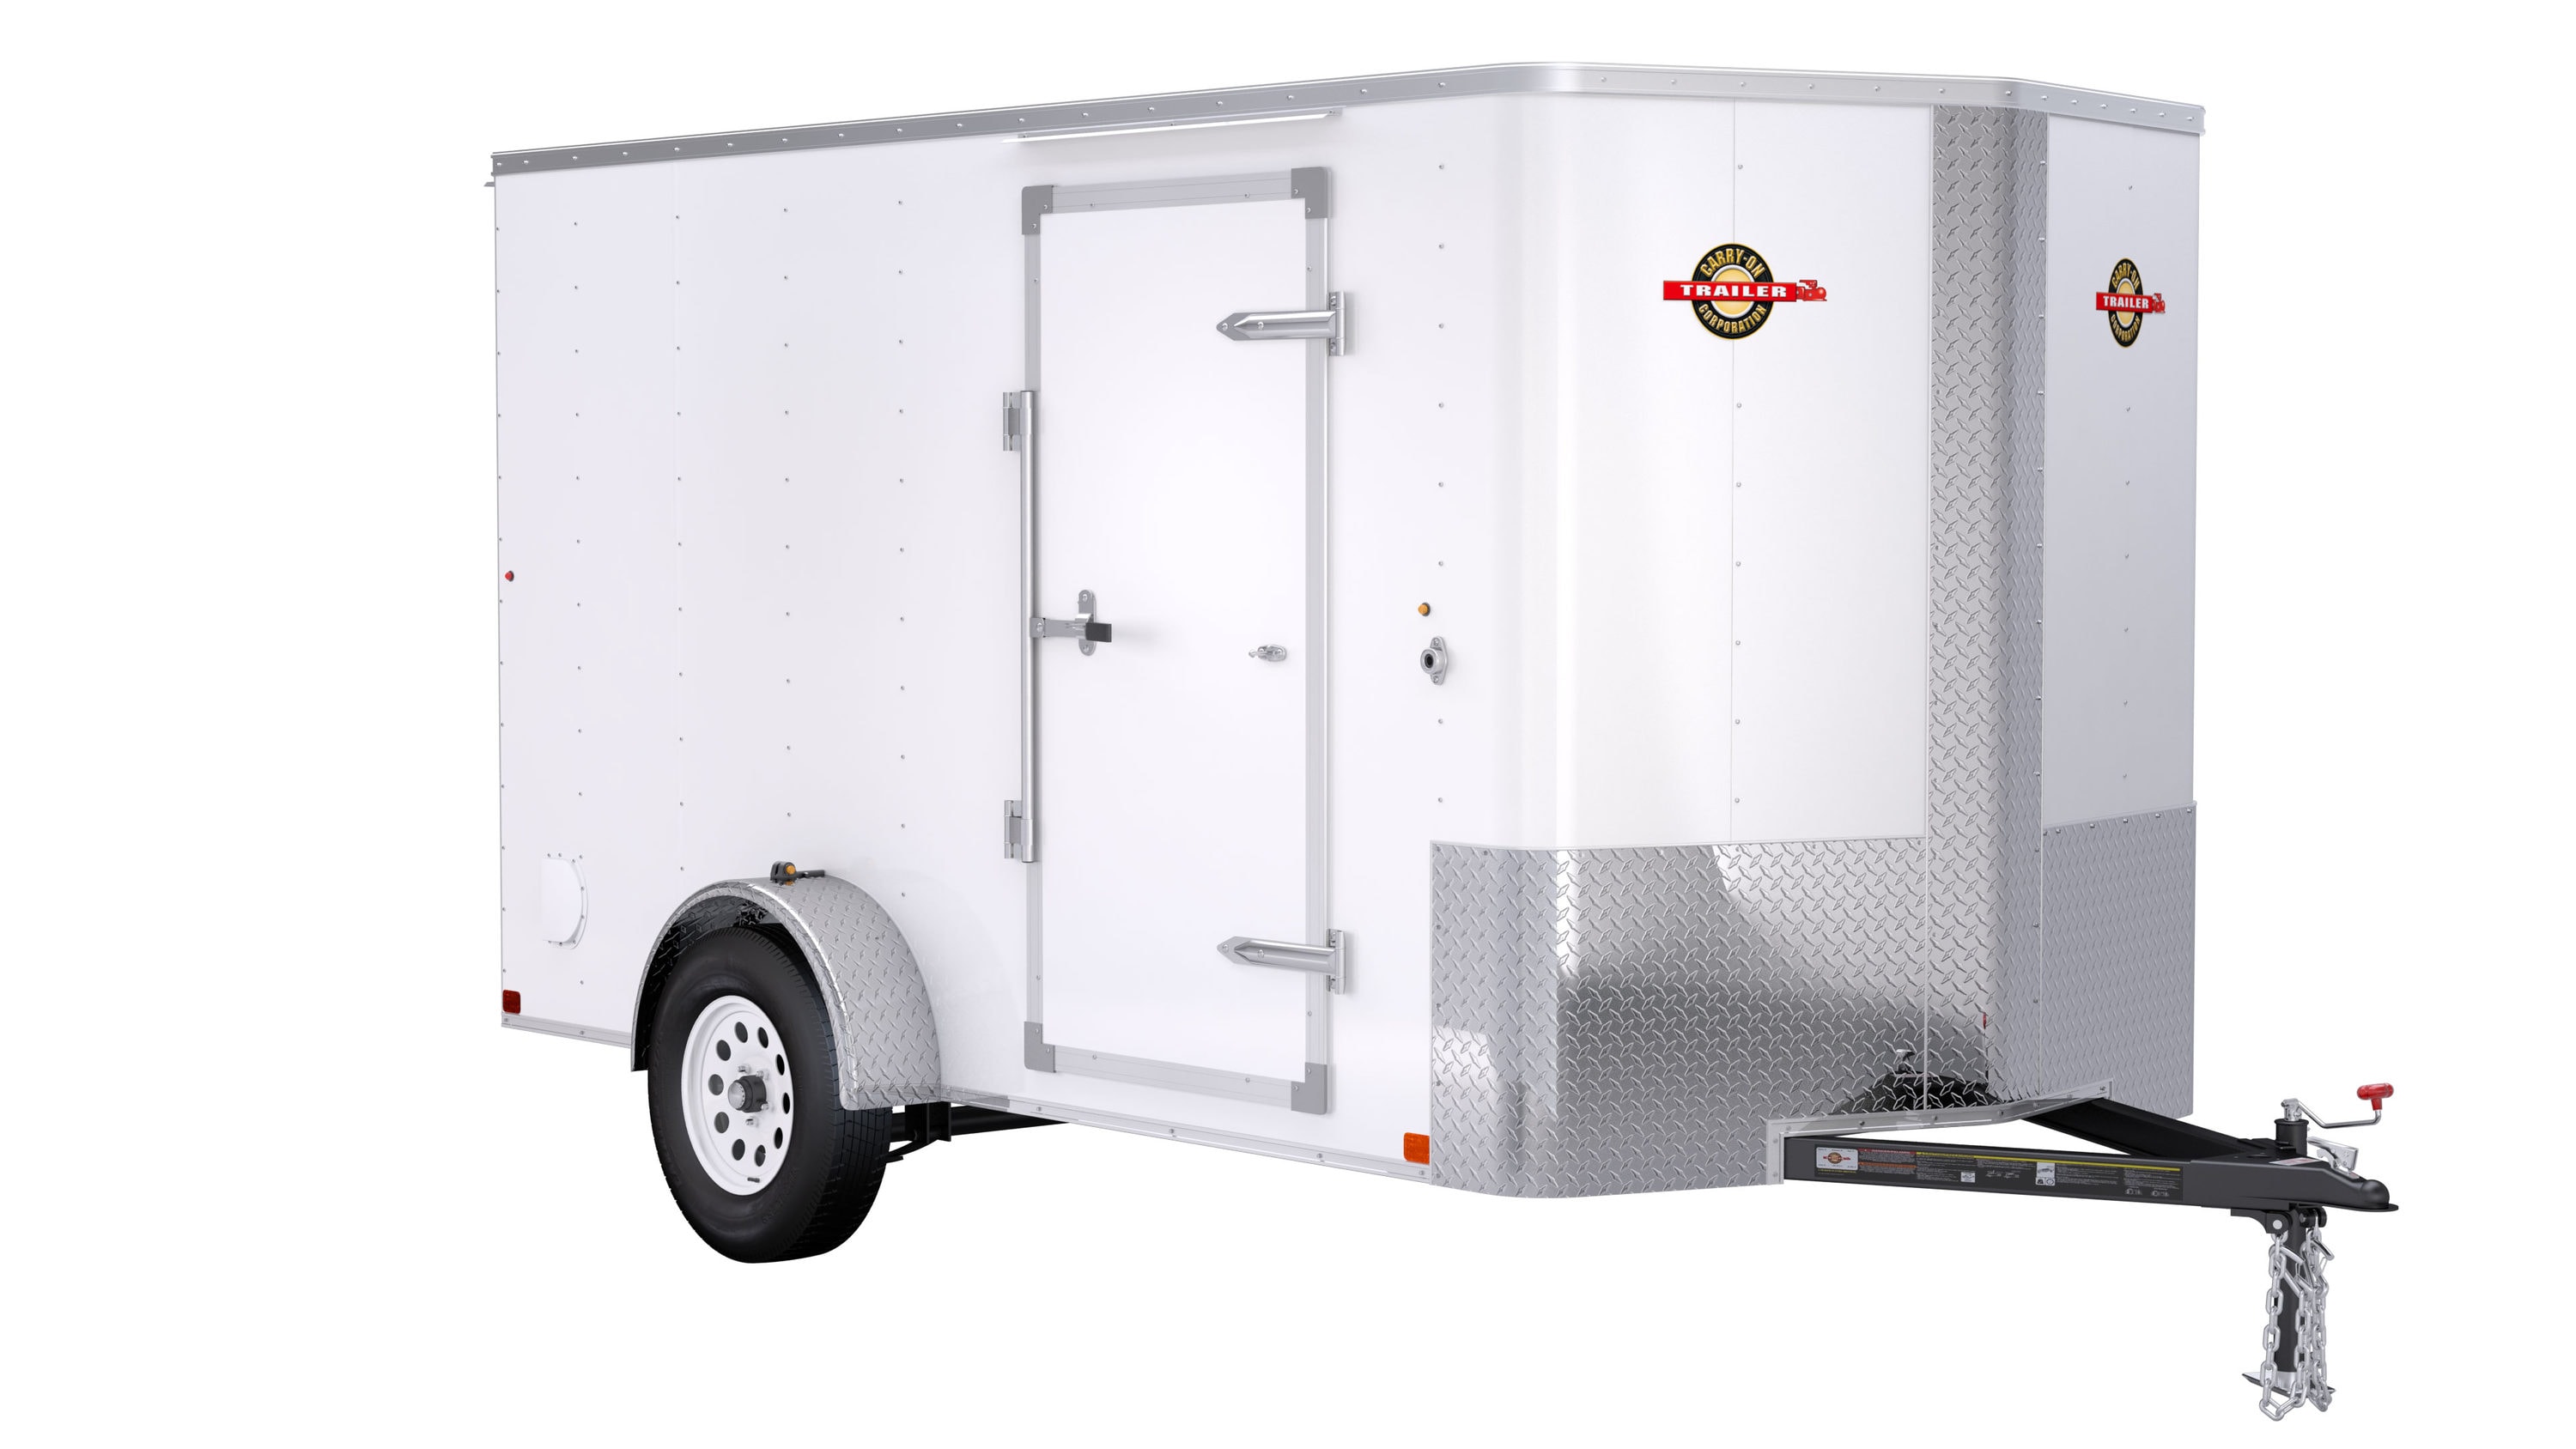 We converted a CARGO TRAILER into our new Mobile Shop!